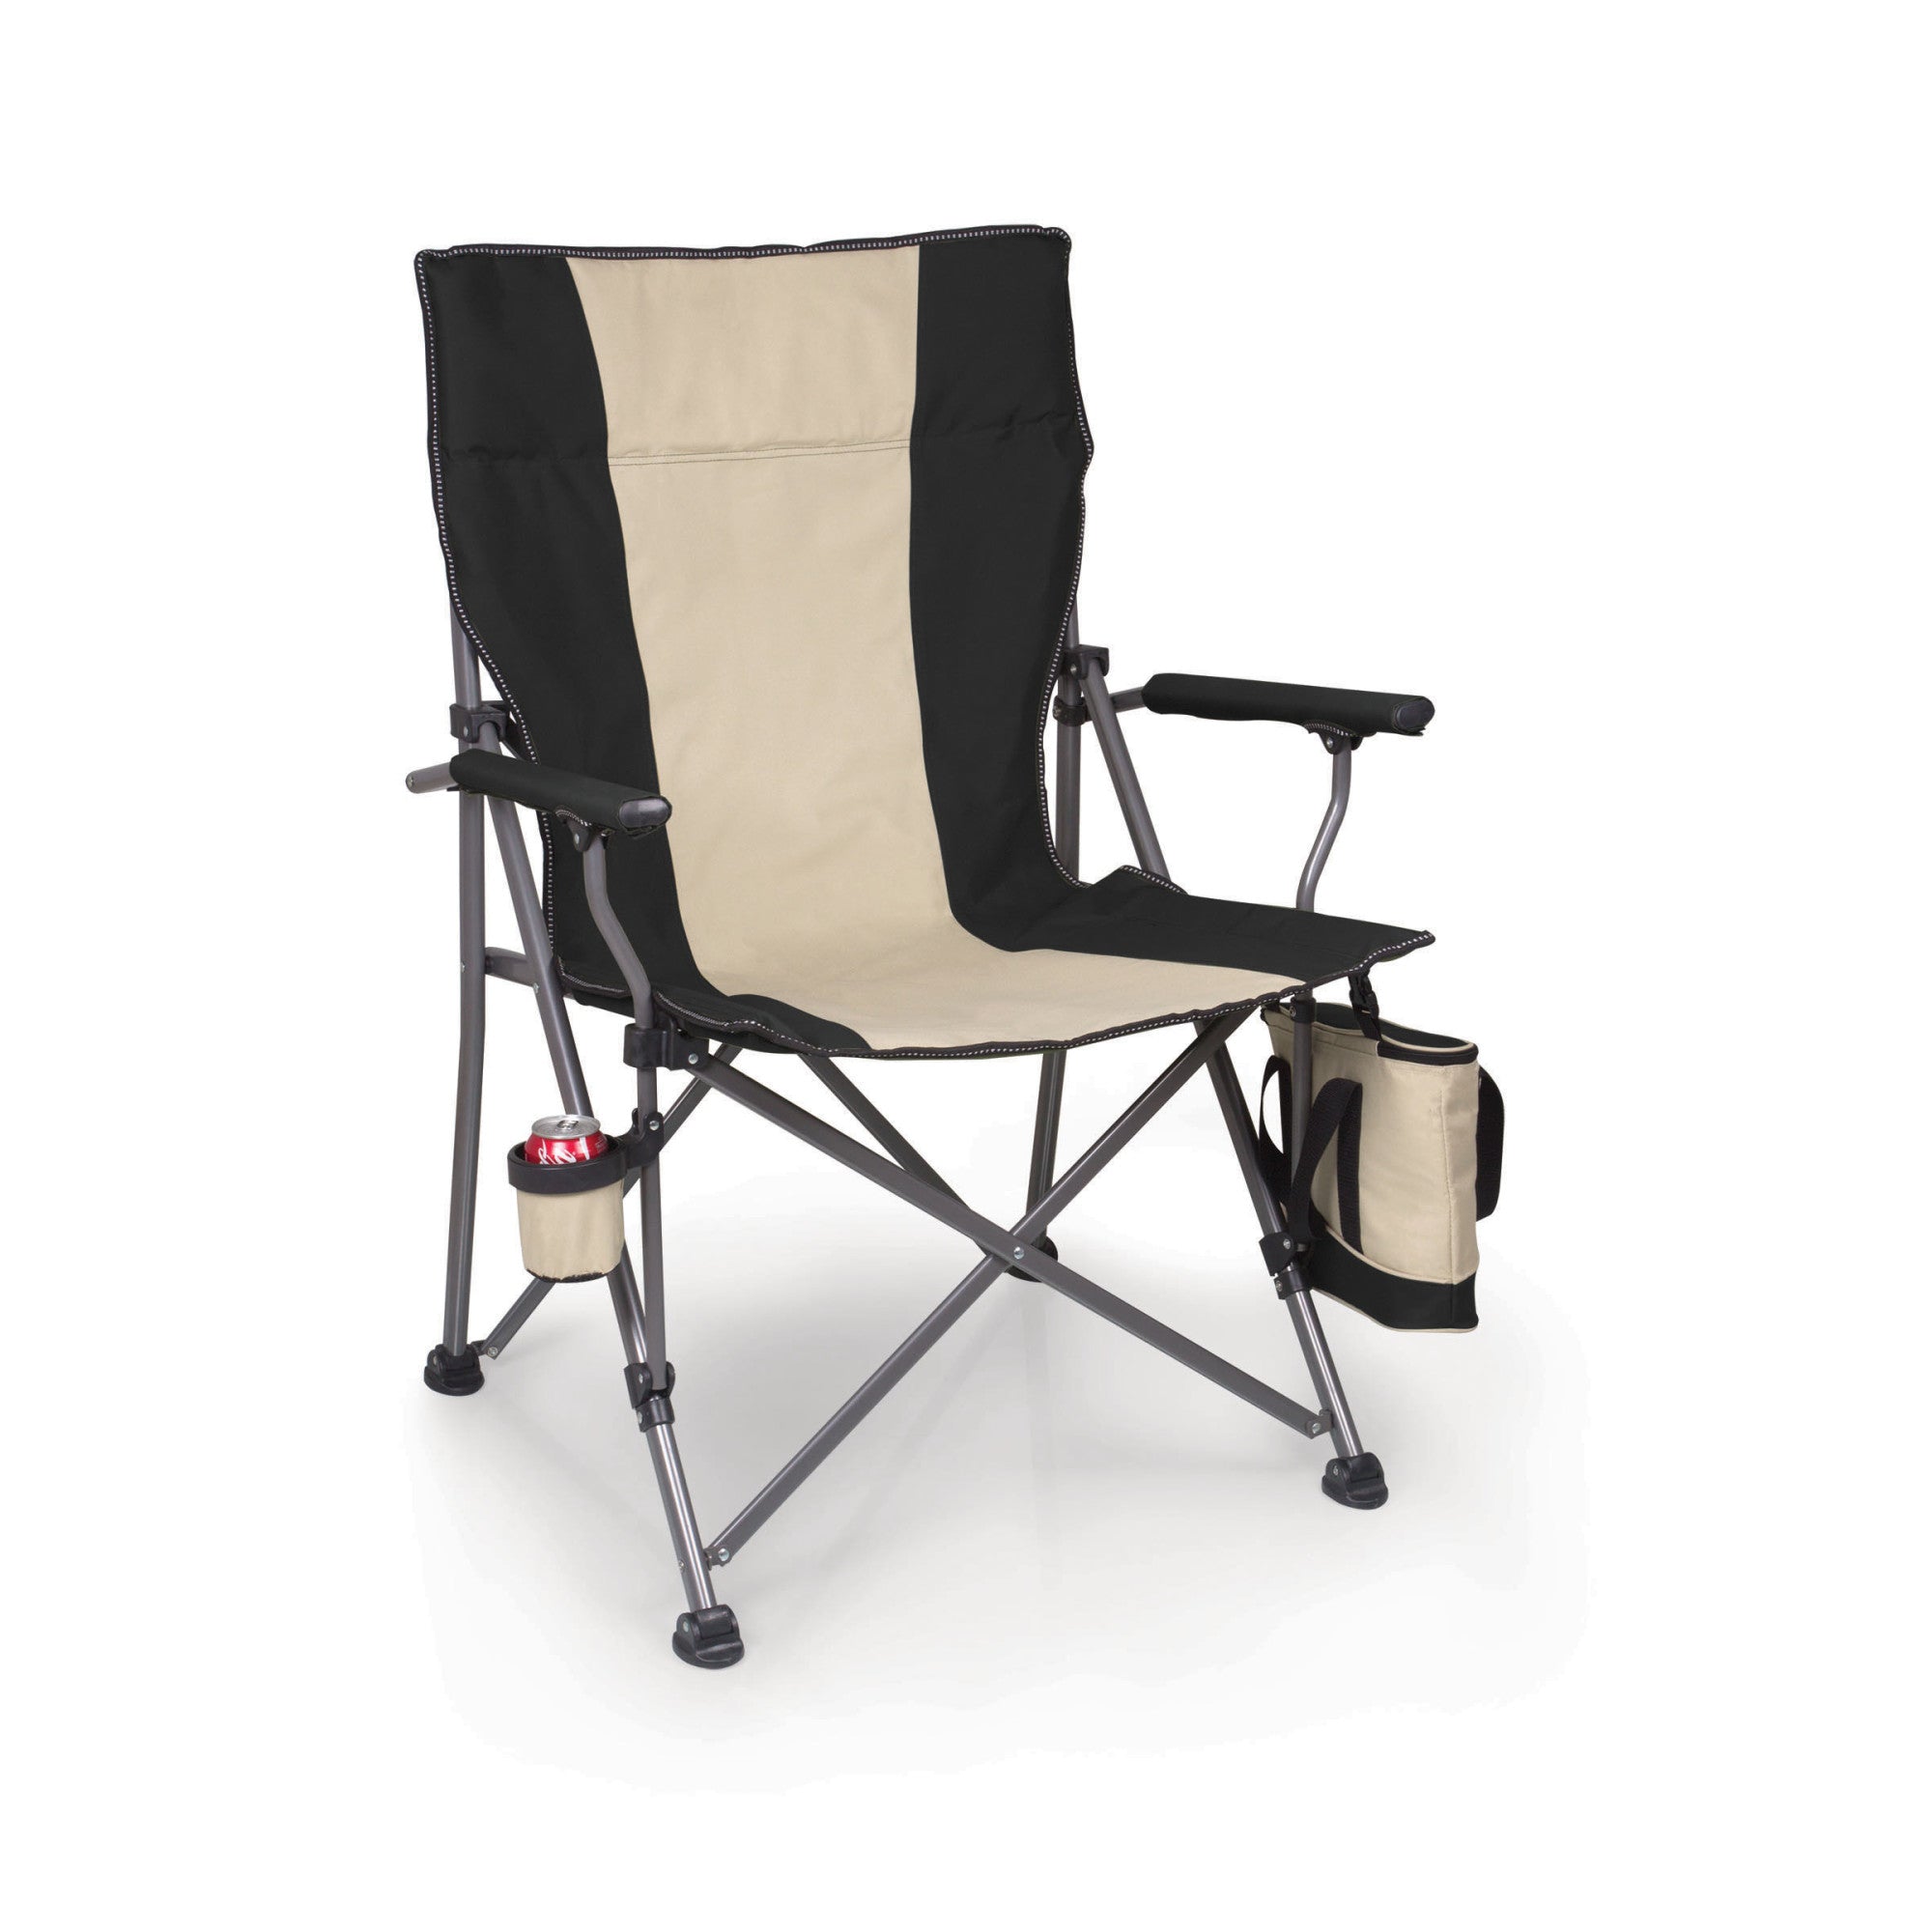 Stanford Cardinal - Big Bear XXL Camping Chair with Cooler